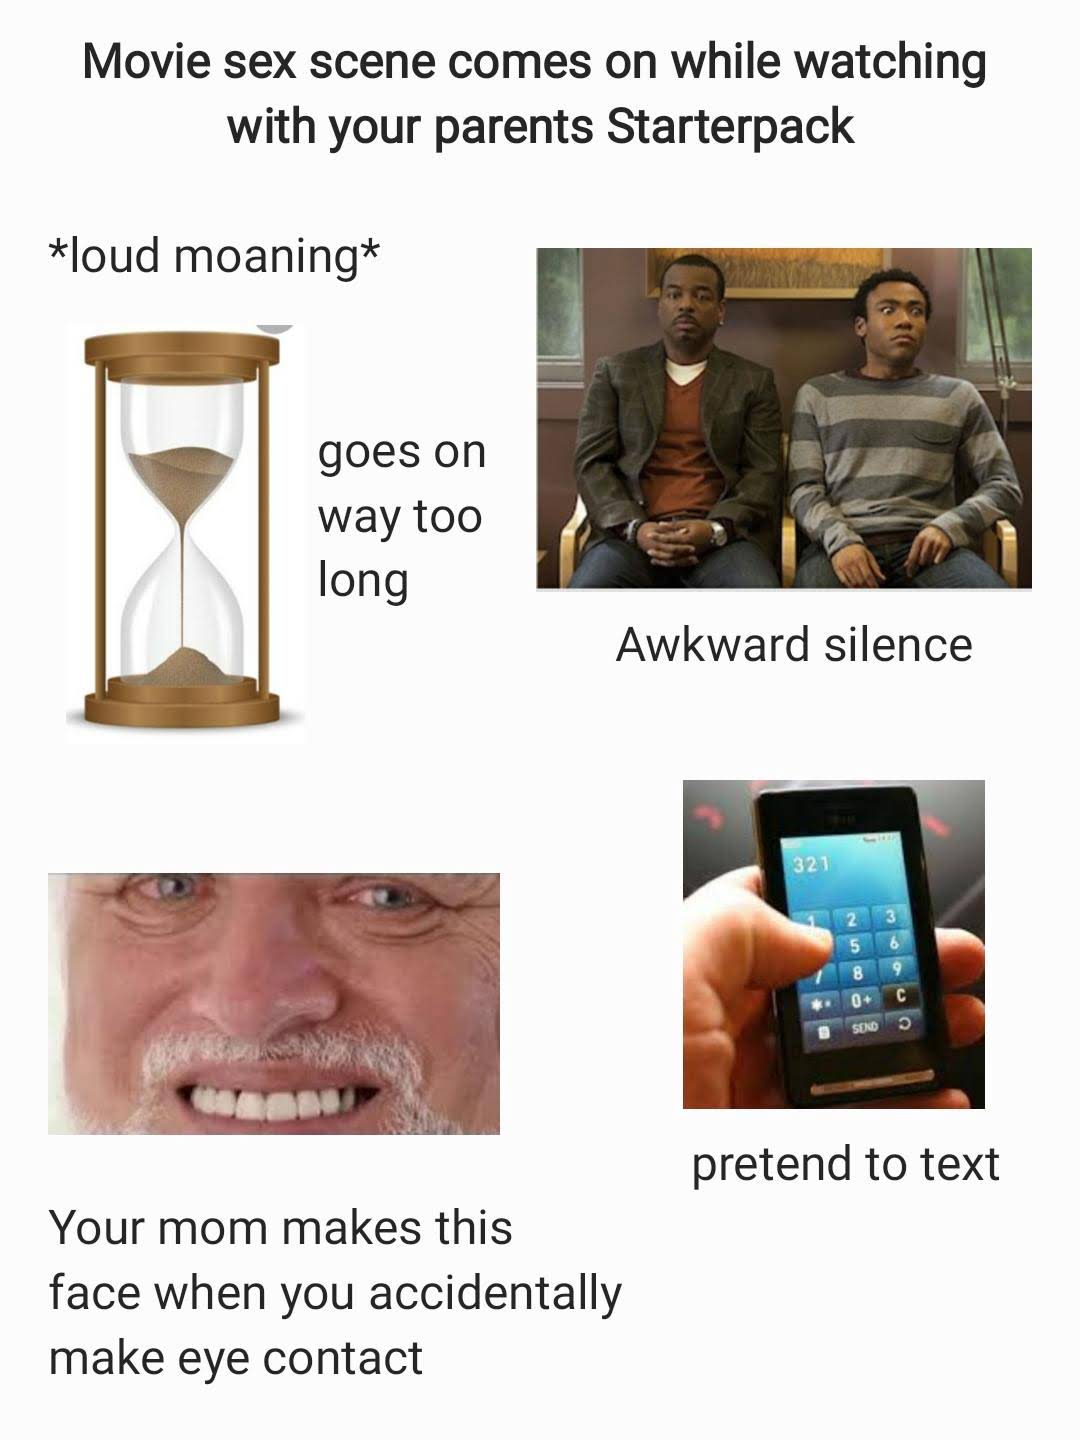 sex-memes - communication - Movie sex scene comes on while watching with your parents Starterpack loud moaning goes on way too long Awkward silence 321 6 5 8 C Seno pretend to text Your mom makes this face when you accidentally make eye contact